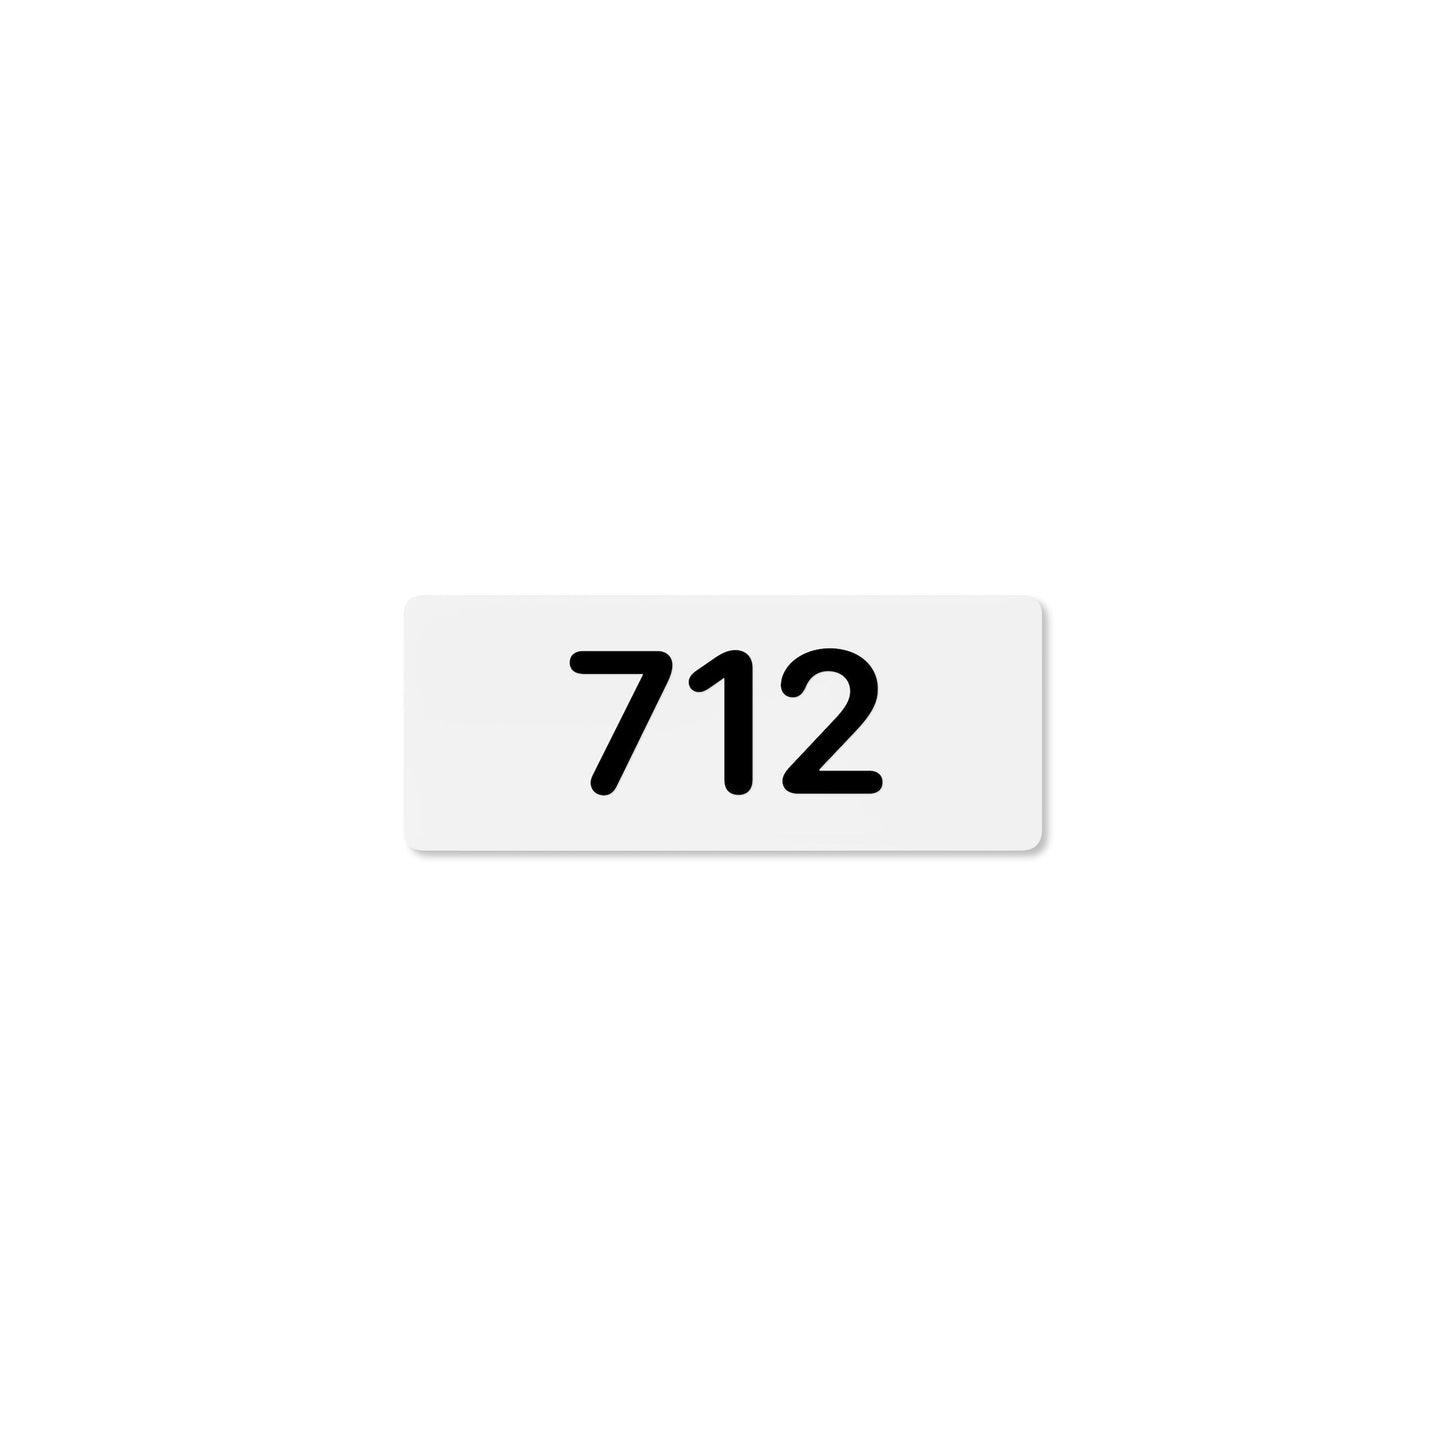 Numeral 712